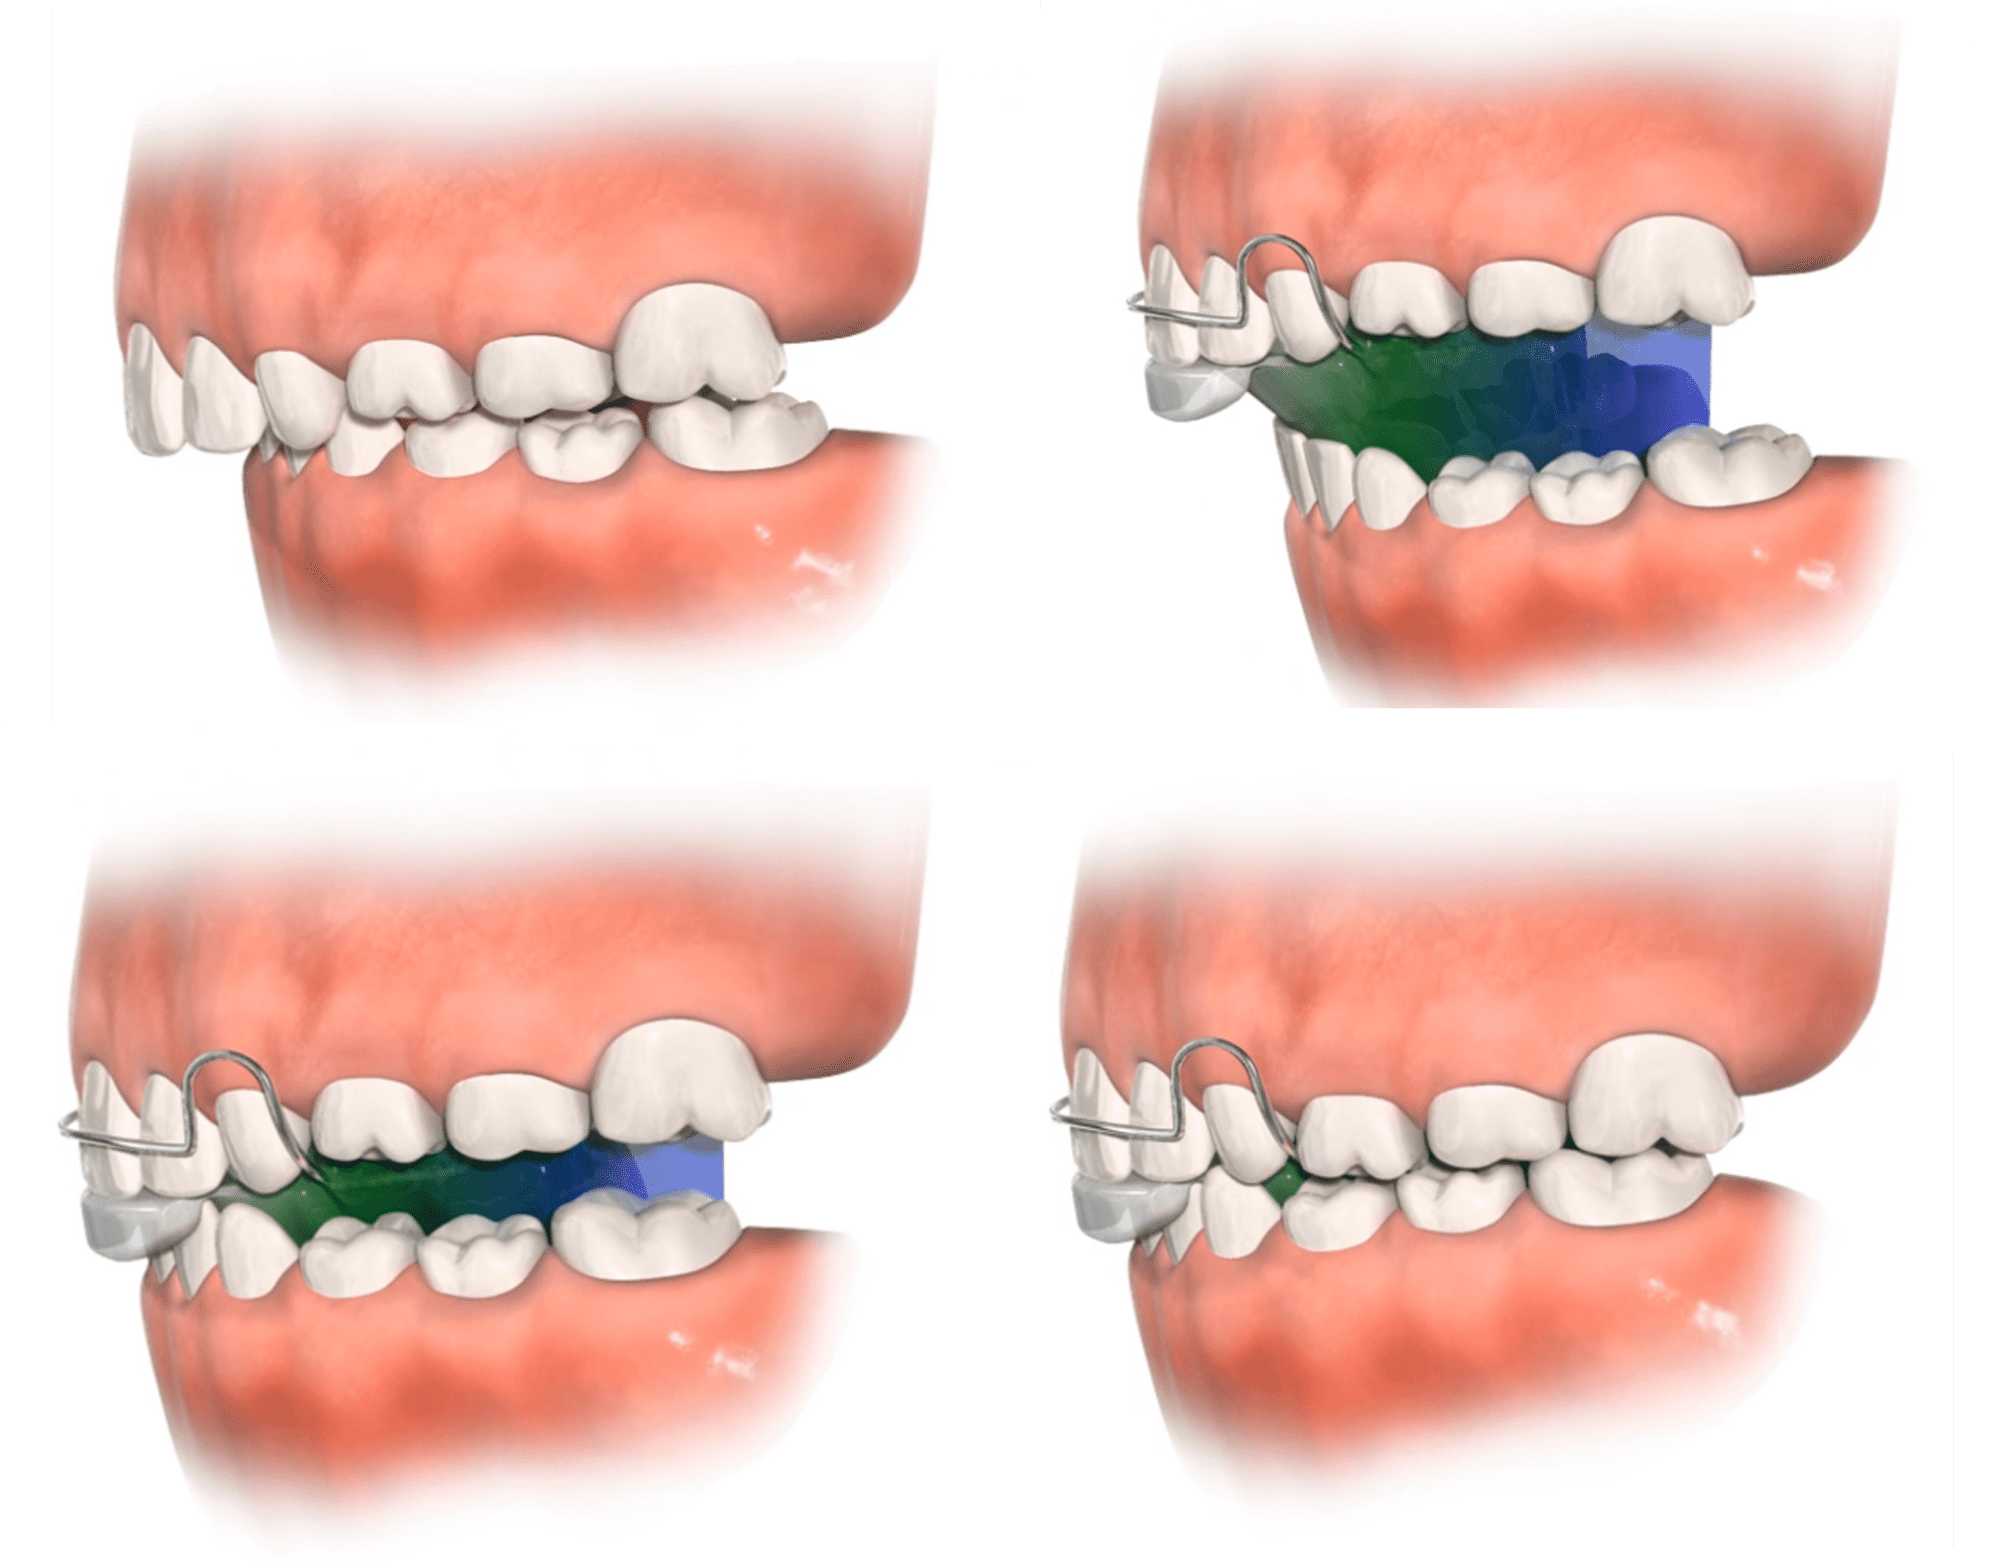 Activator to open the bite (Bionator to open) correcting a Class II malocclusion with deep overbite.